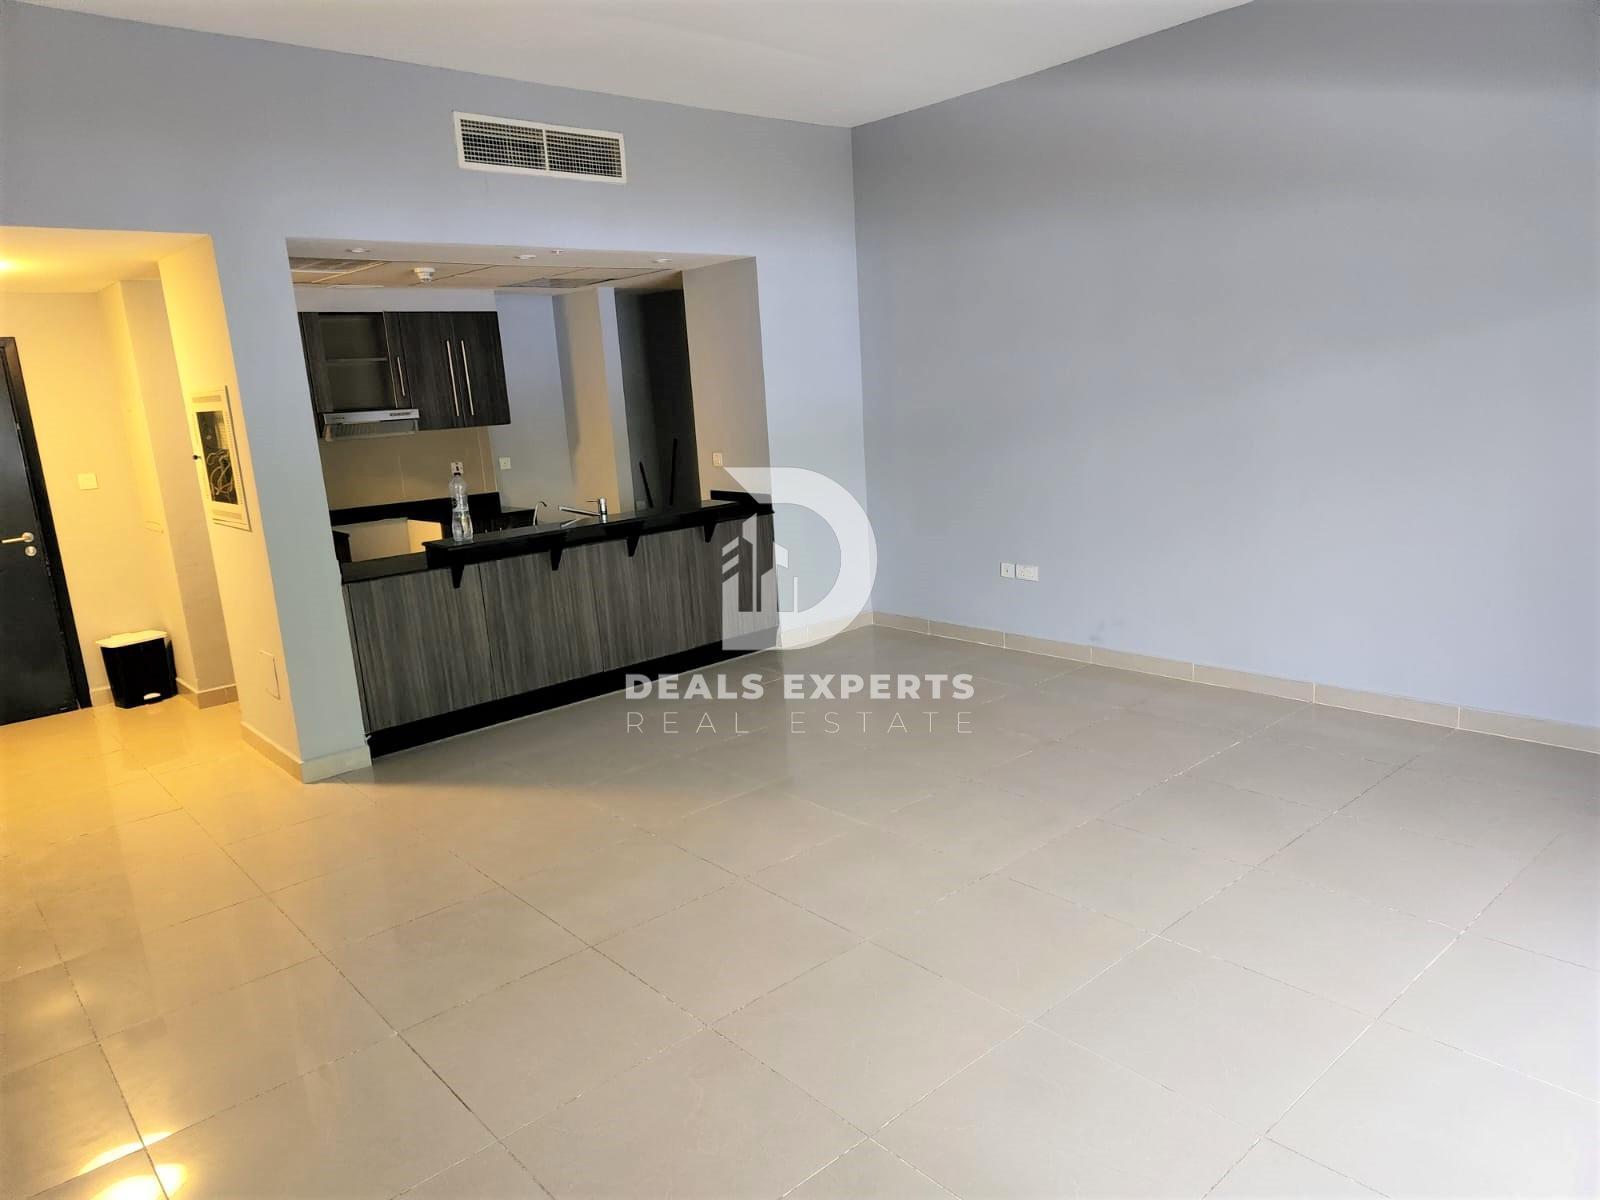 2 bed, 2 bath Apartment for sale in Tower 41, Al Reef Downtown, Al Reef, Abu Dhabi for price AED 700000 